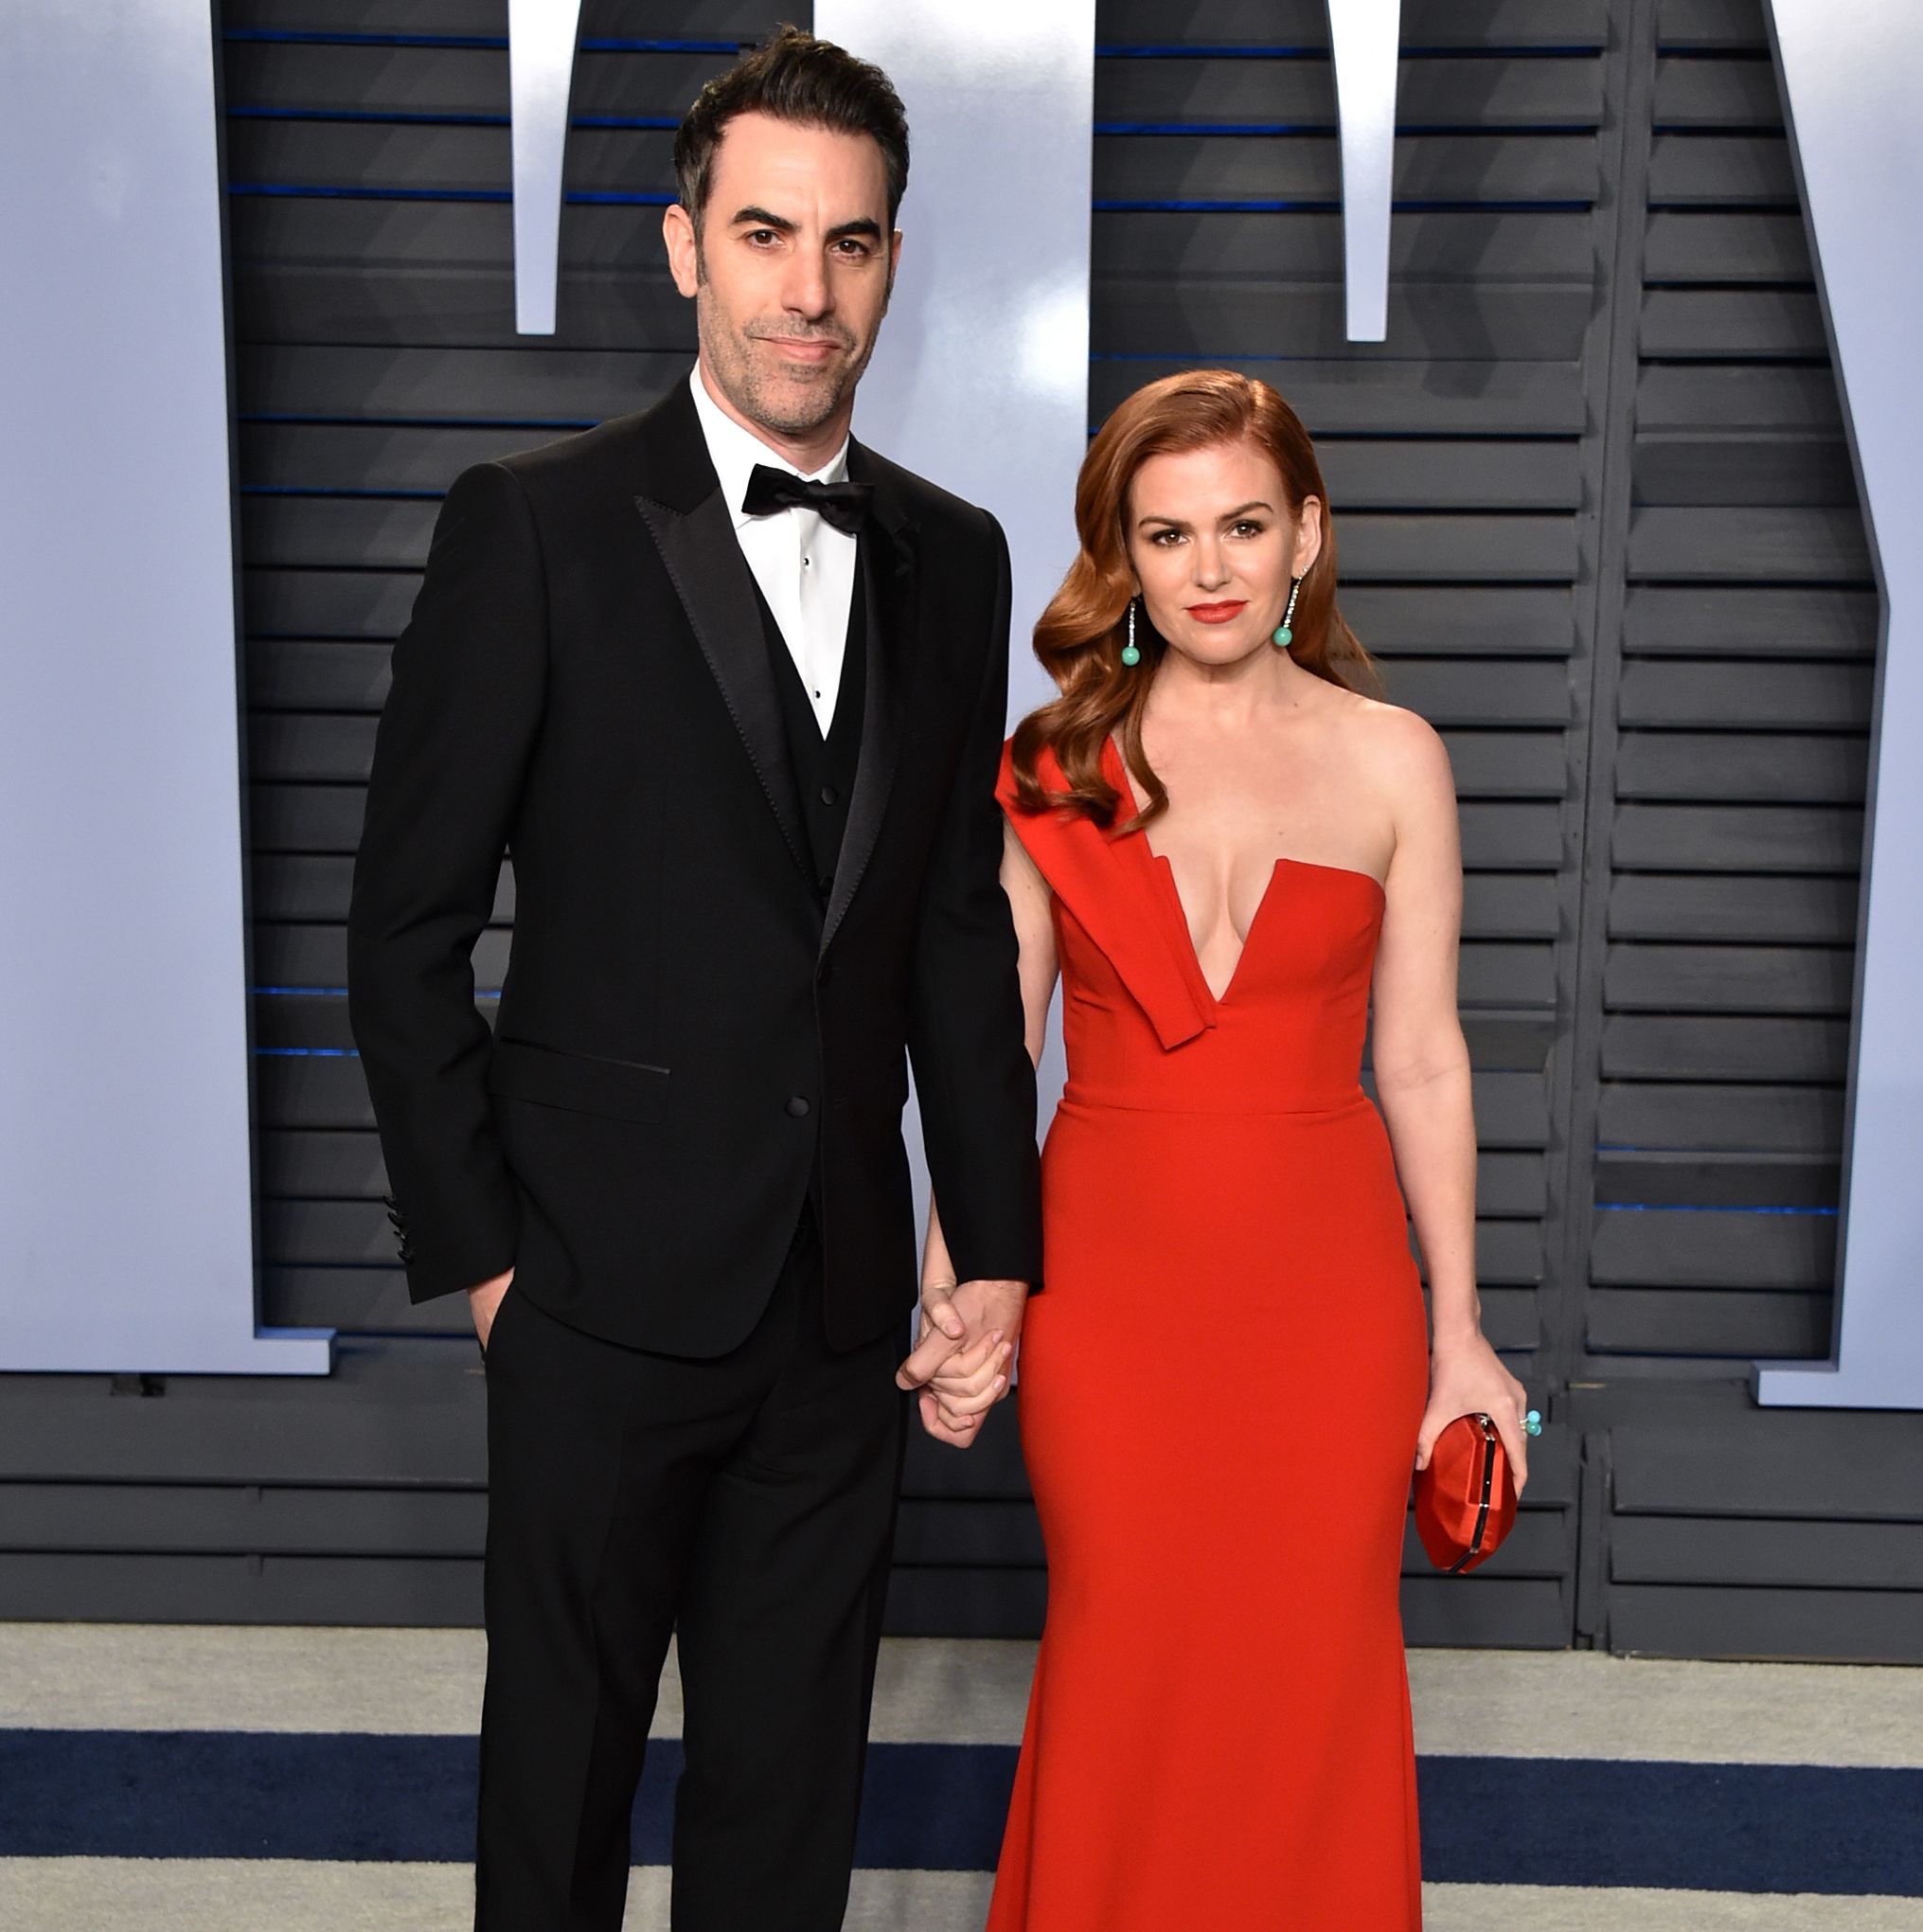 Isla Fisher Announces Divorce from Sacha Baron Cohen After 13 Years of Marriage